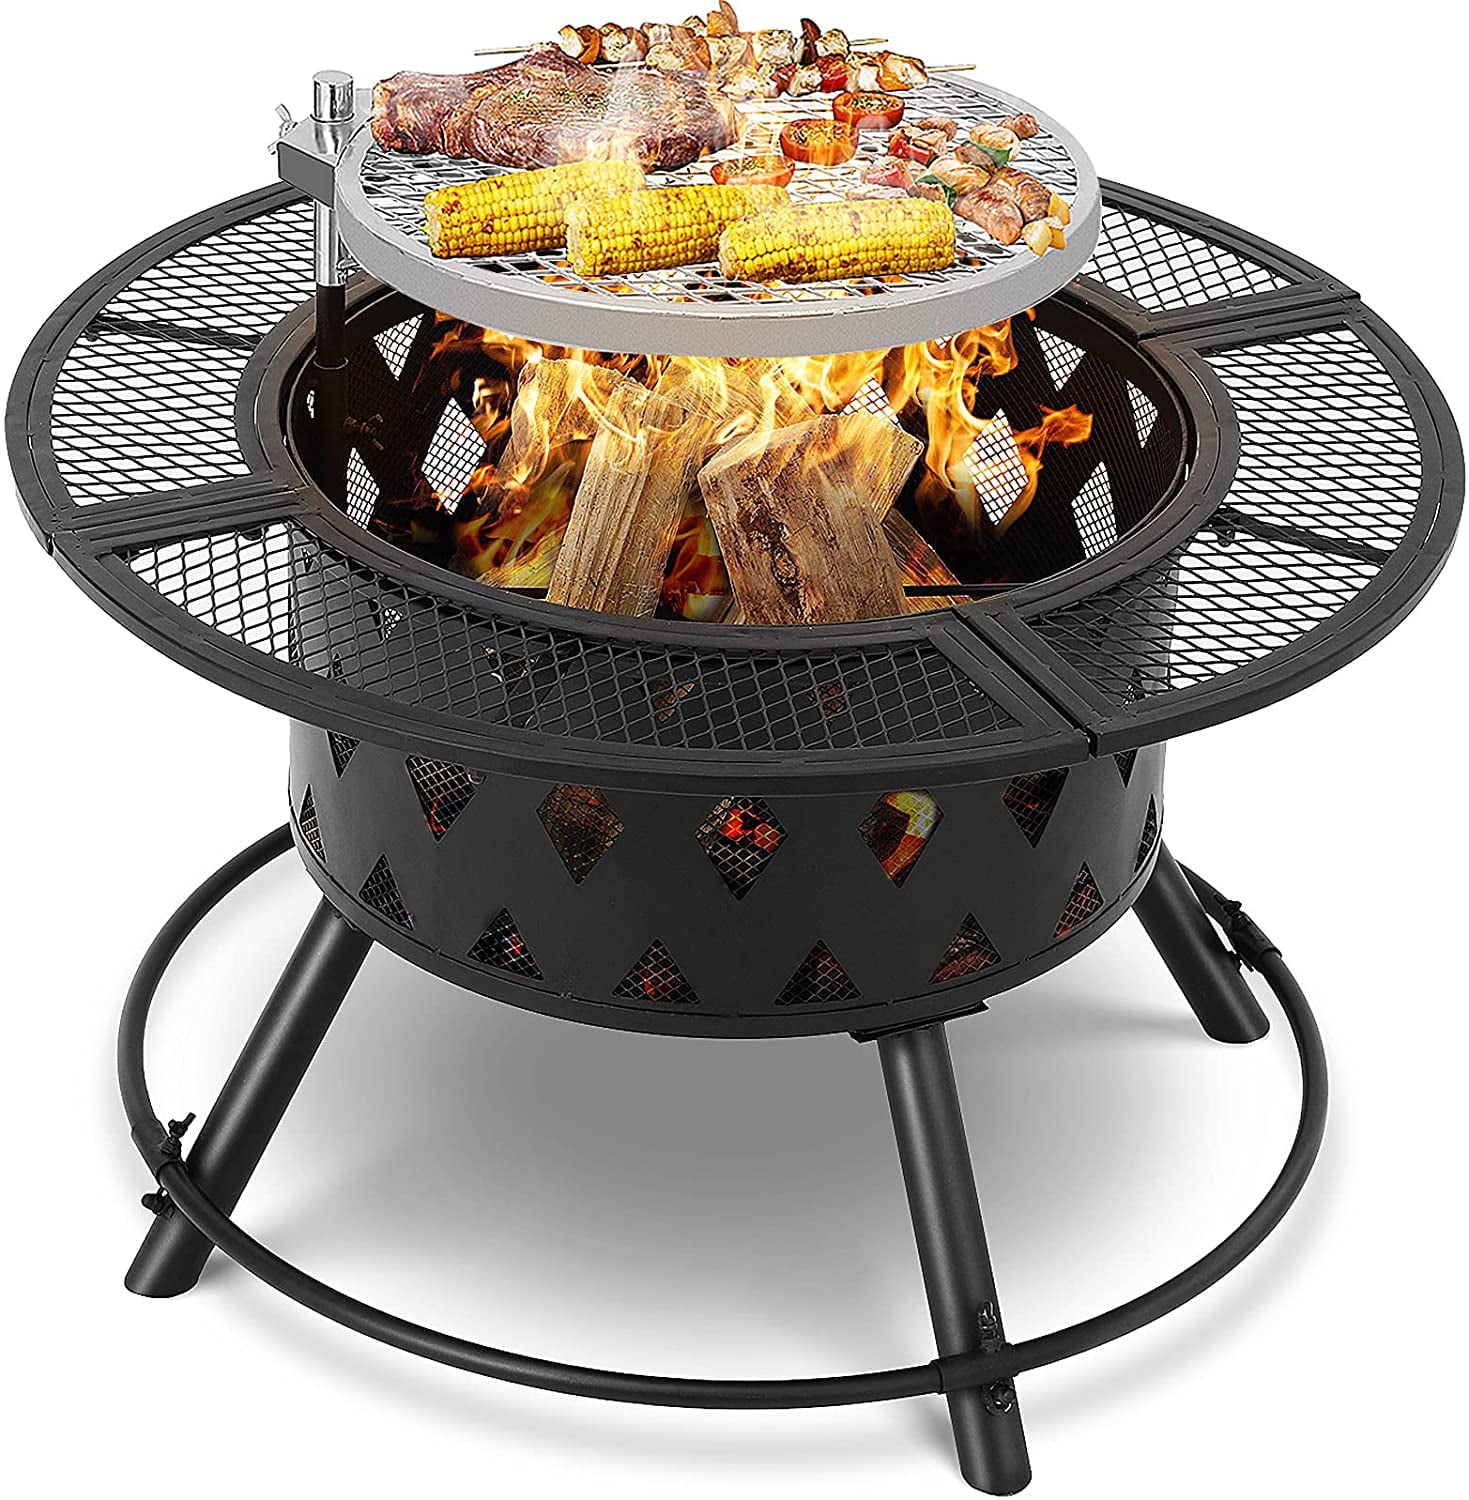 Gartio 36 Wood Burning Fire Pit Bowl, Waterproof Cover For Fire Pit